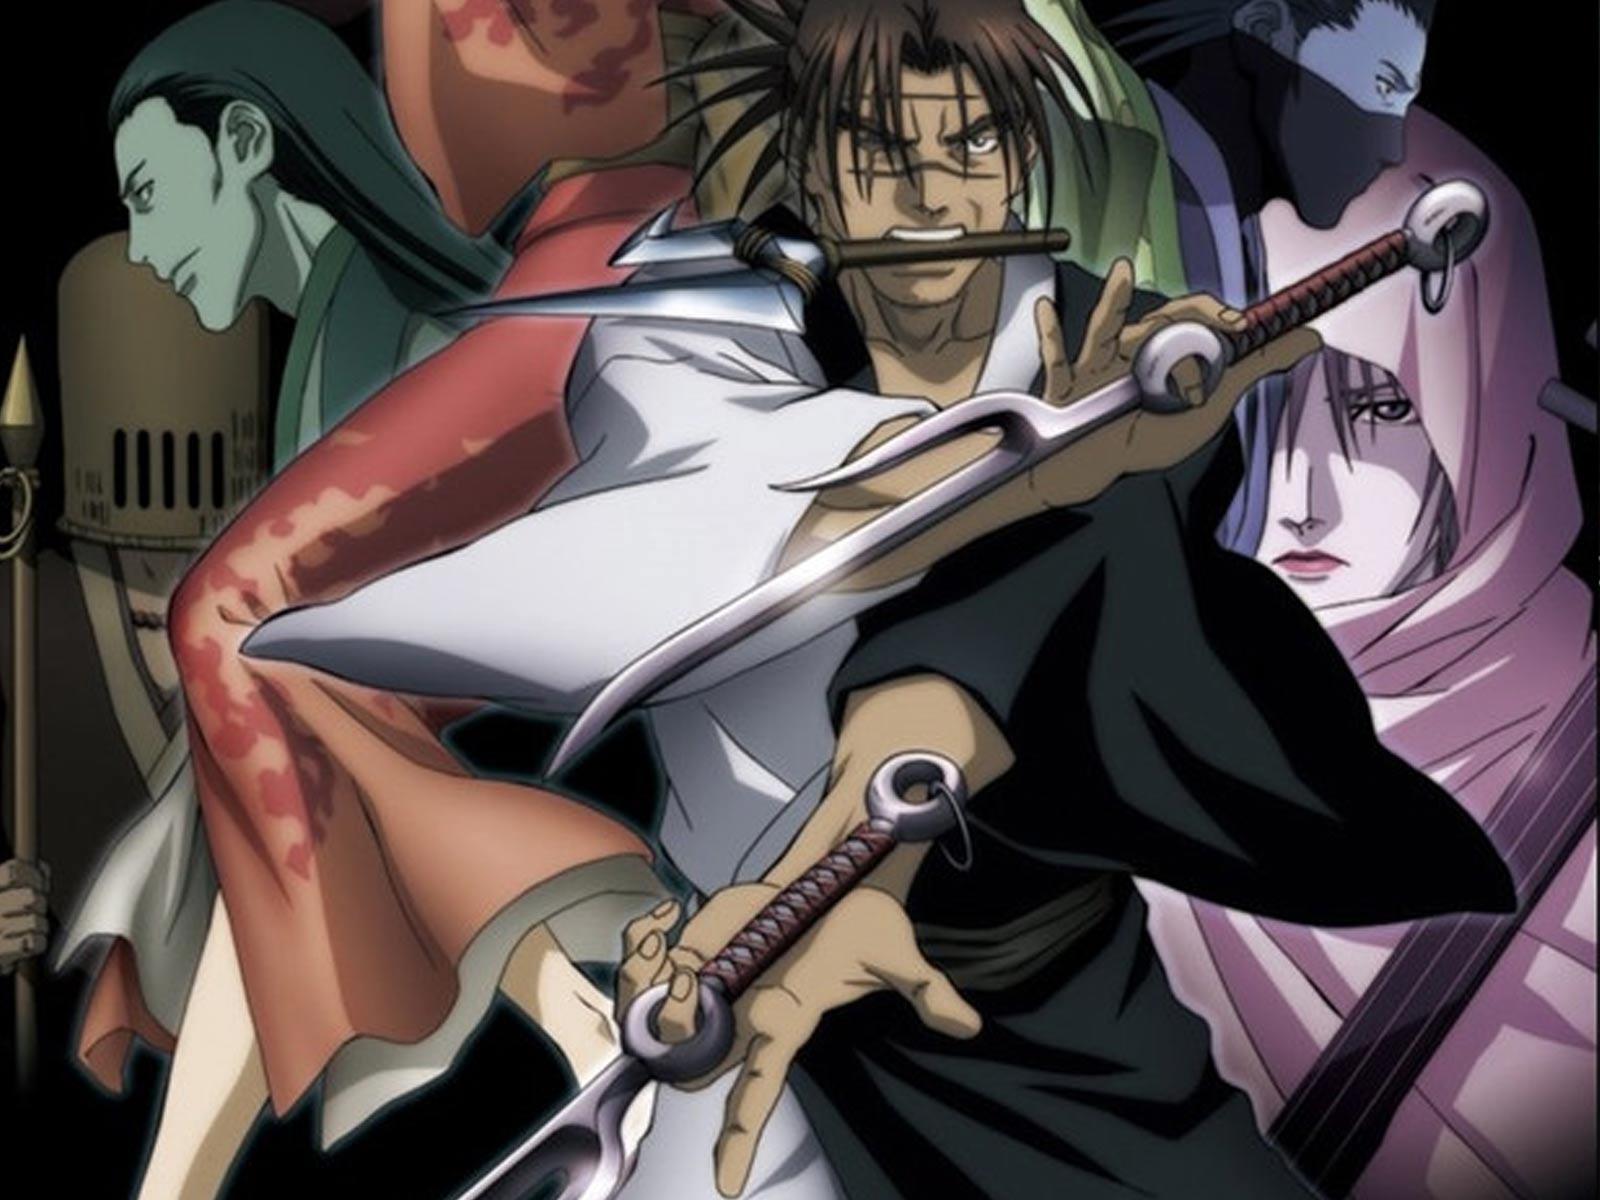 Blade of the Immortal Gets New “Complete” Anime Adaptation